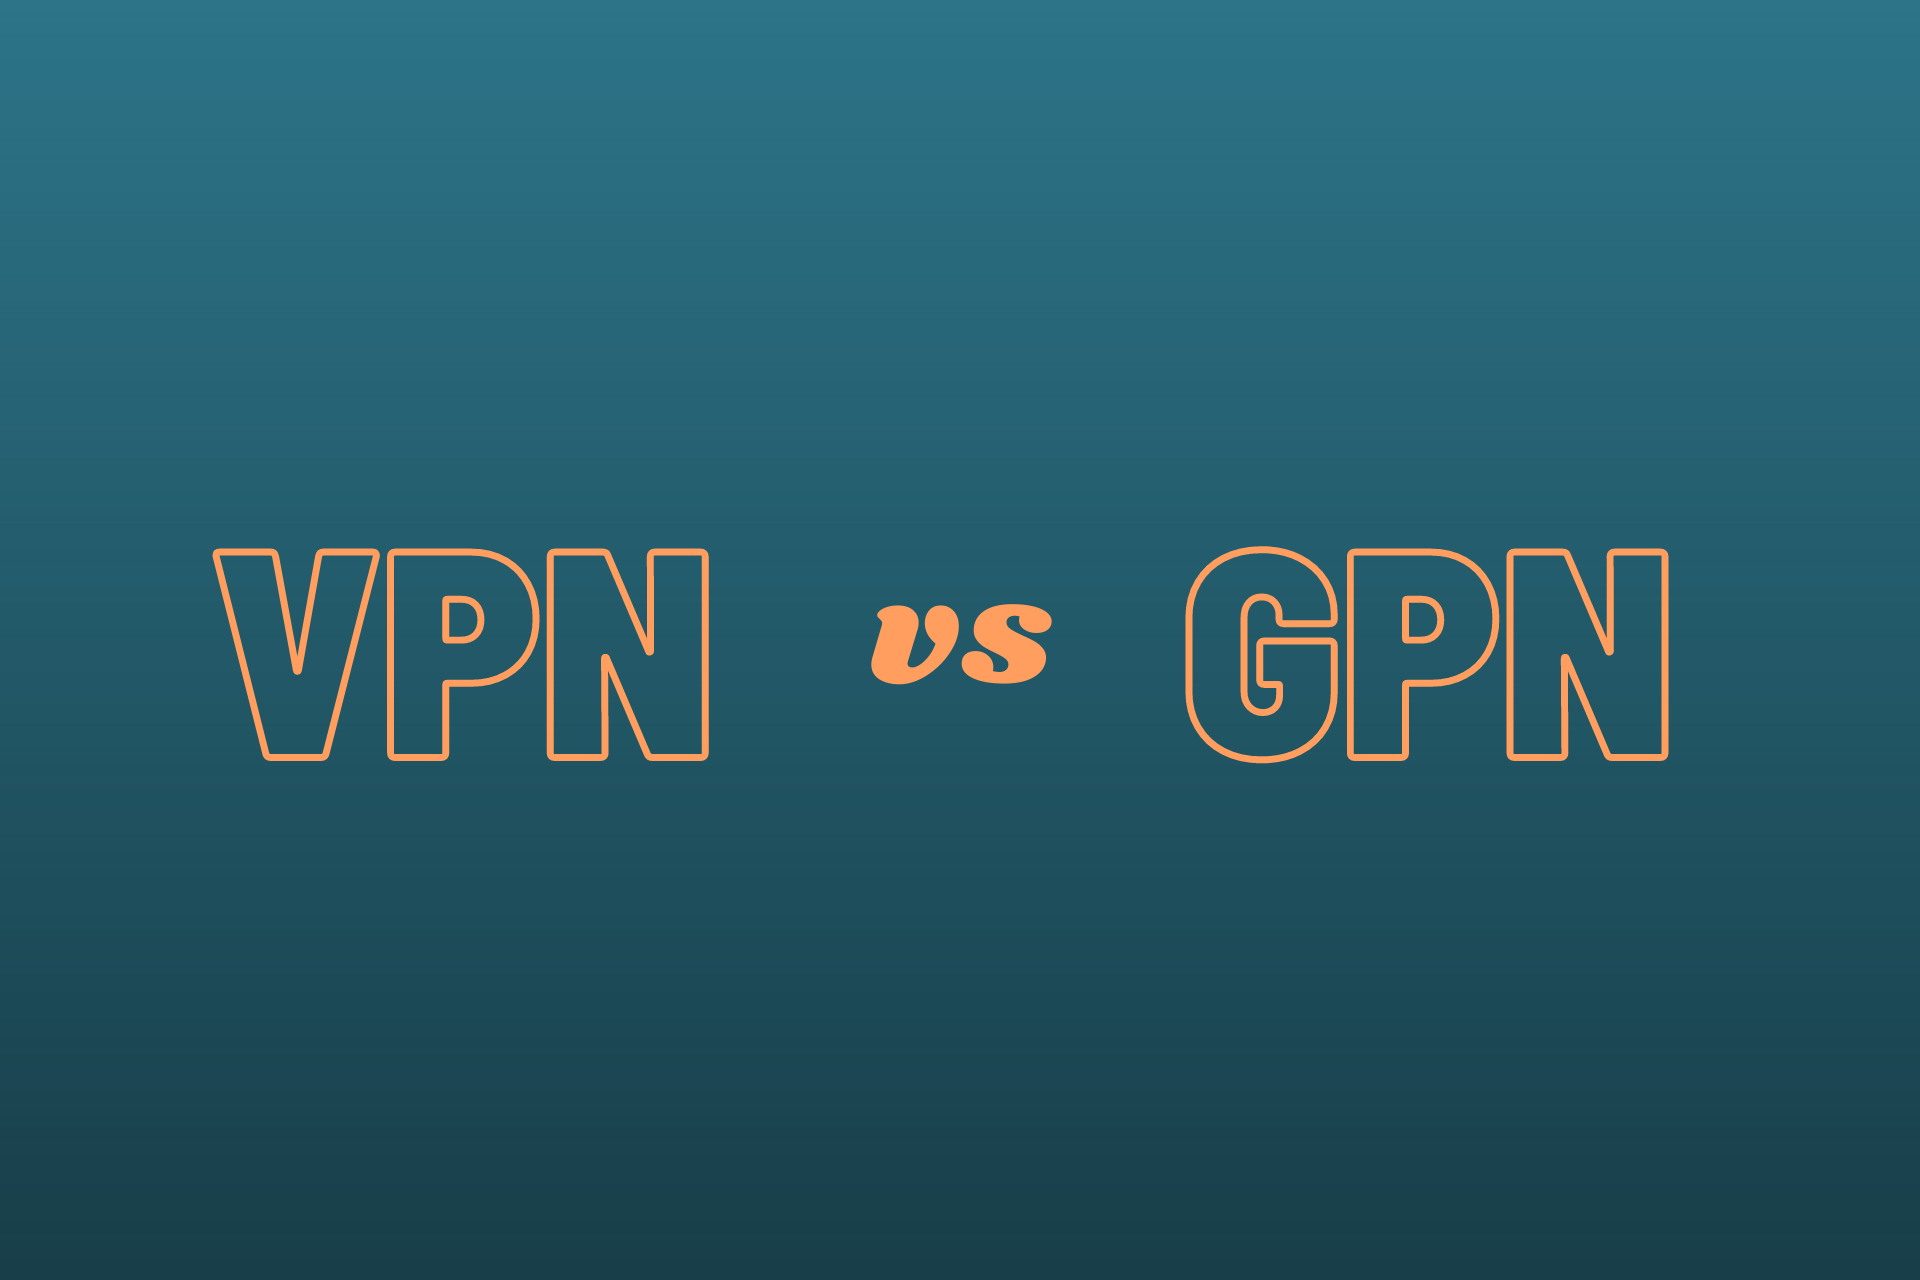 VPN vs GPN: What are the differences?